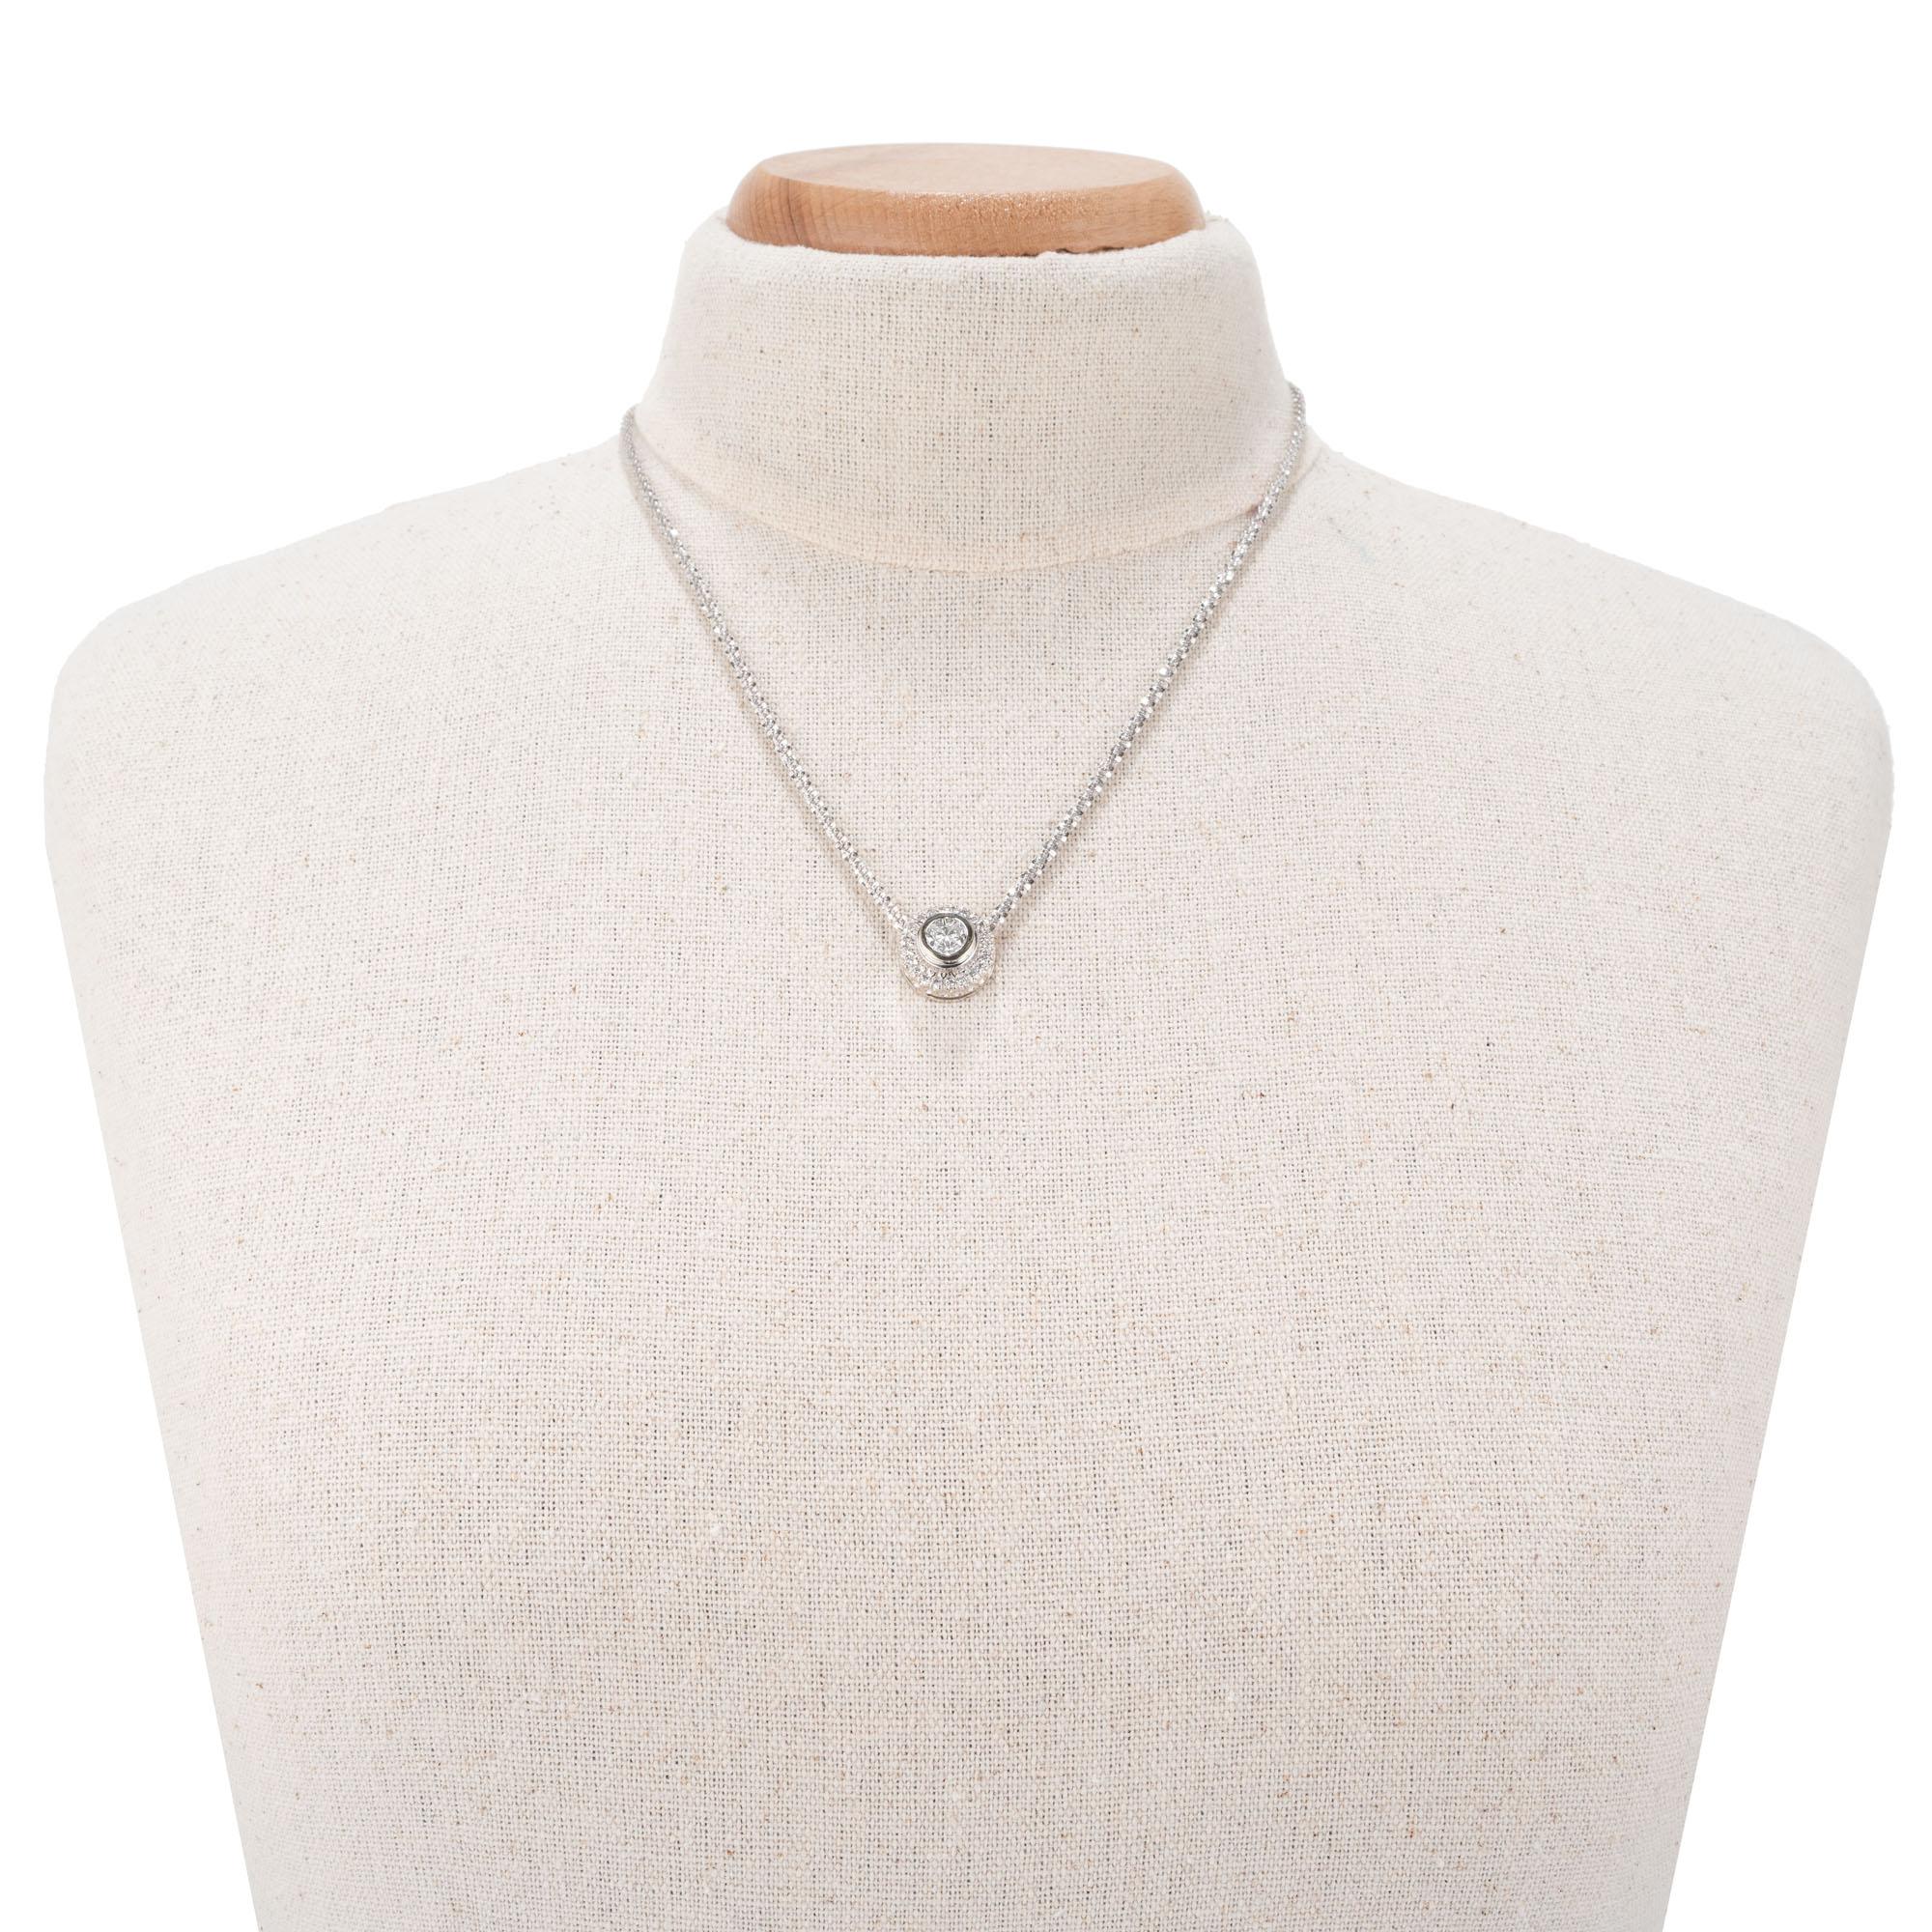 .91 Carat Diamond White Gold Pendant Necklace In Excellent Condition For Sale In Stamford, CT